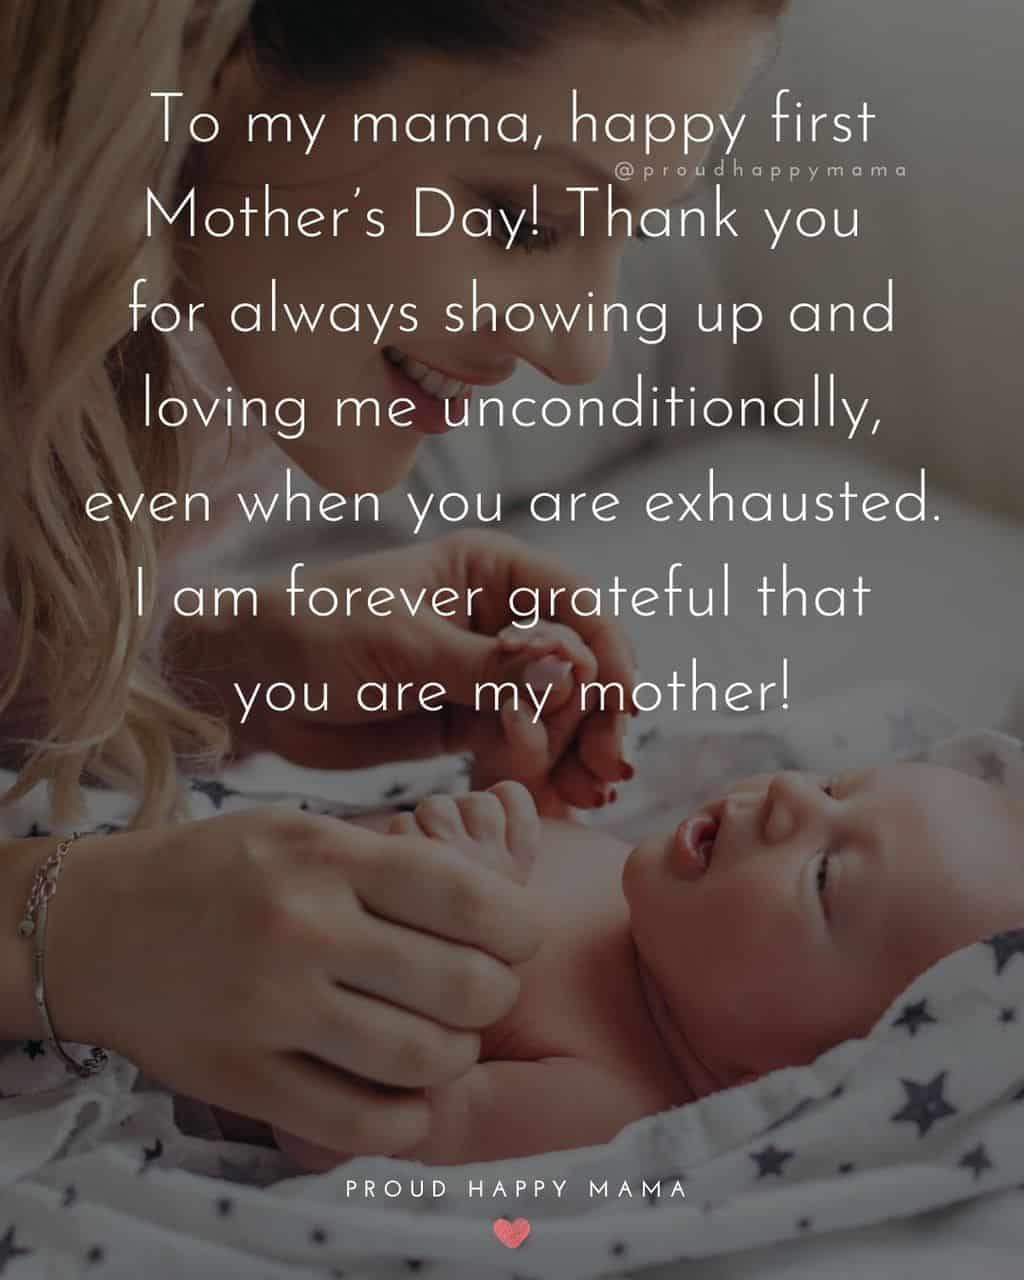 First Mothers Day Quotes - To my mama, happy first Mother’s Day! Thank you for always showing up and loving me unconditionally, even 